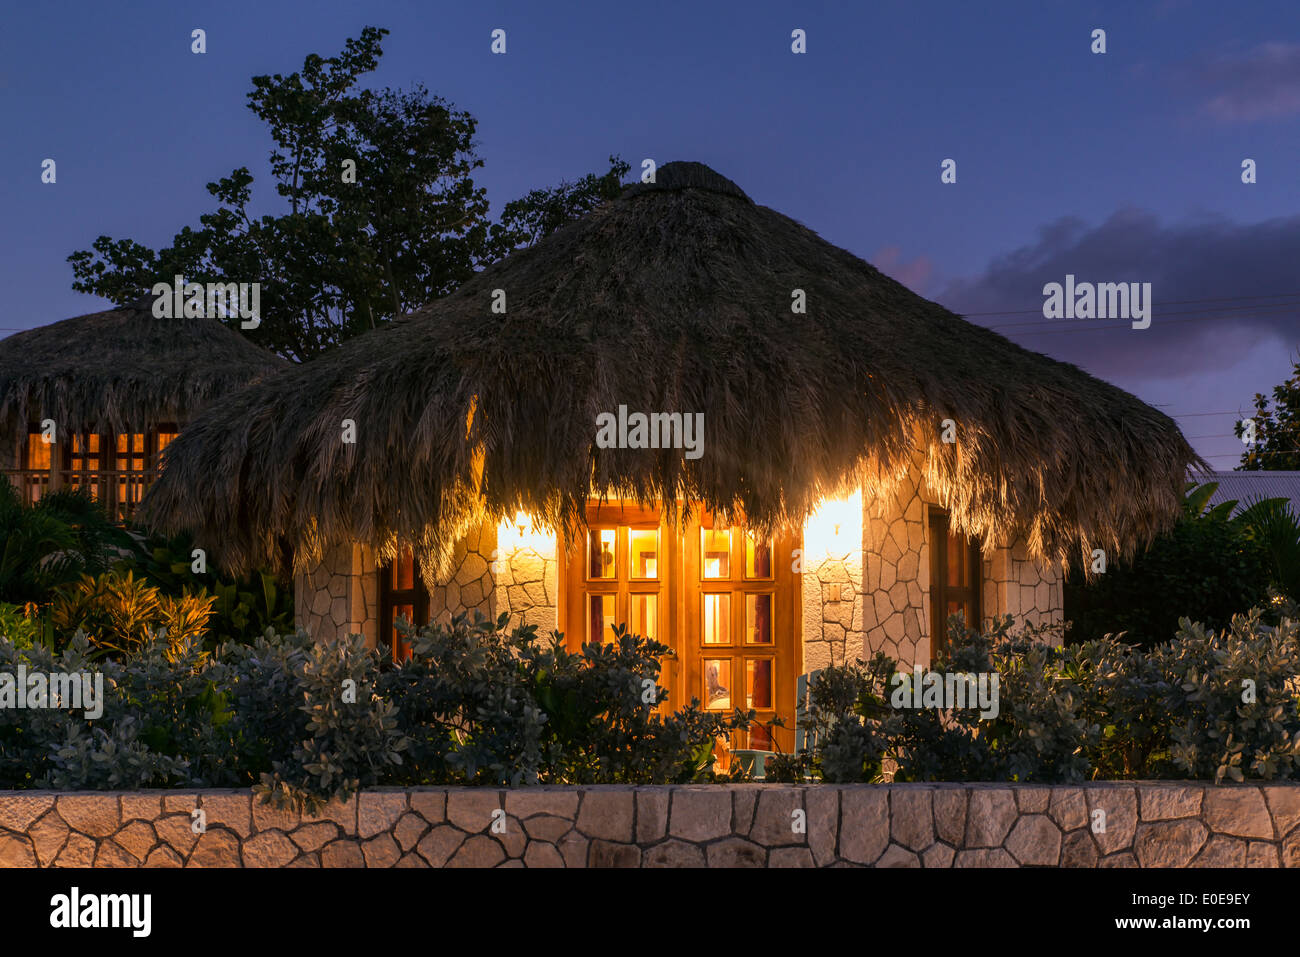 Boutique Hotel Cottages With Thatched Roof At Night Negril